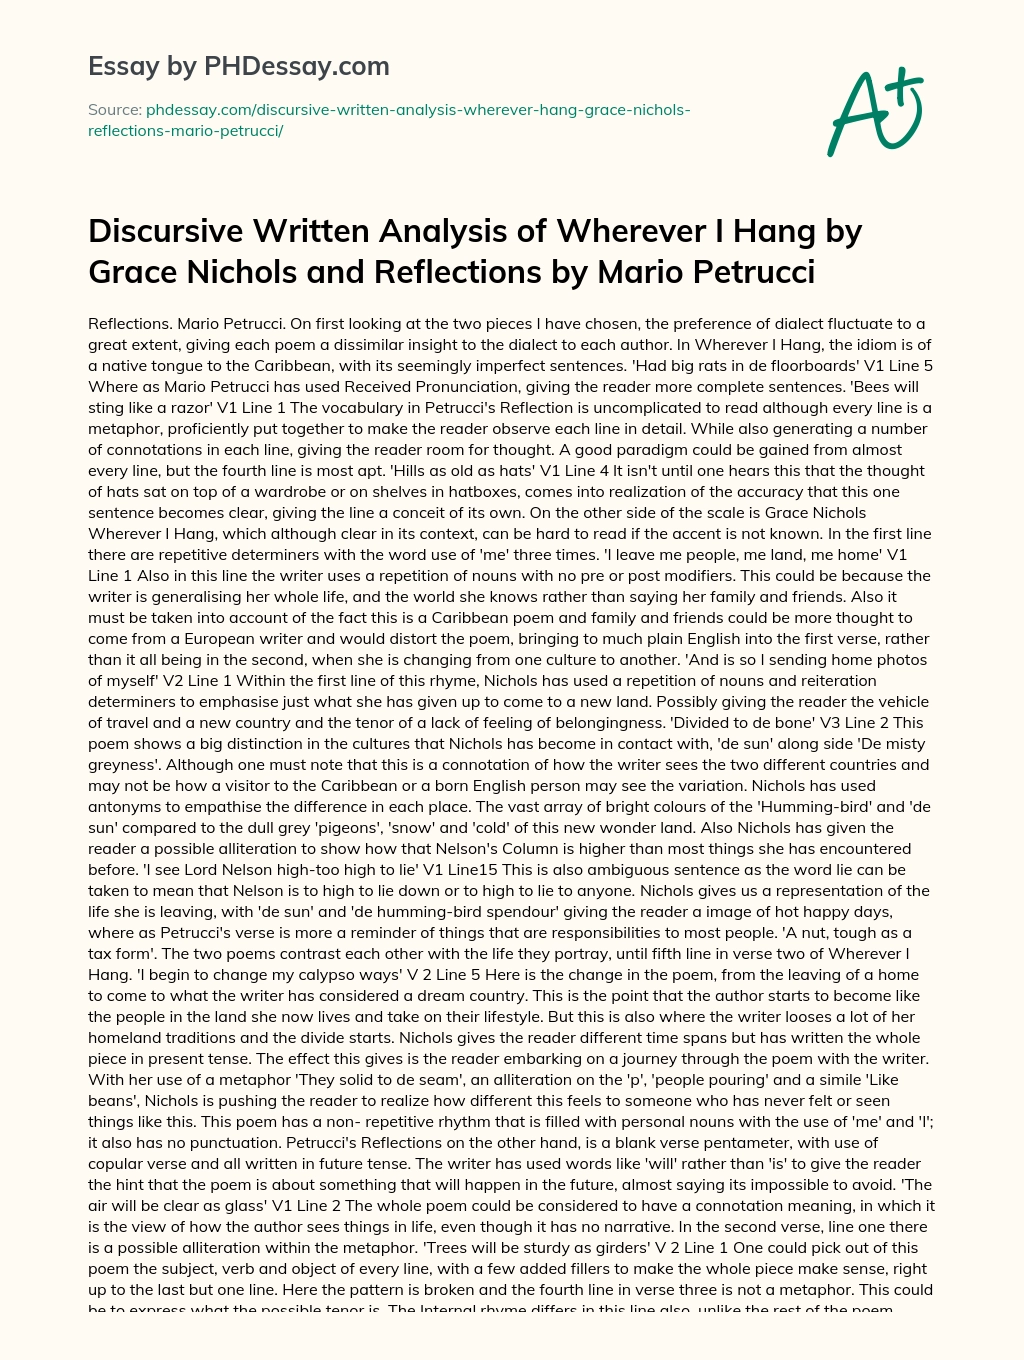 Discursive Written Analysis of Wherever I Hang by Grace Nichols and Reflections by Mario Petrucci essay